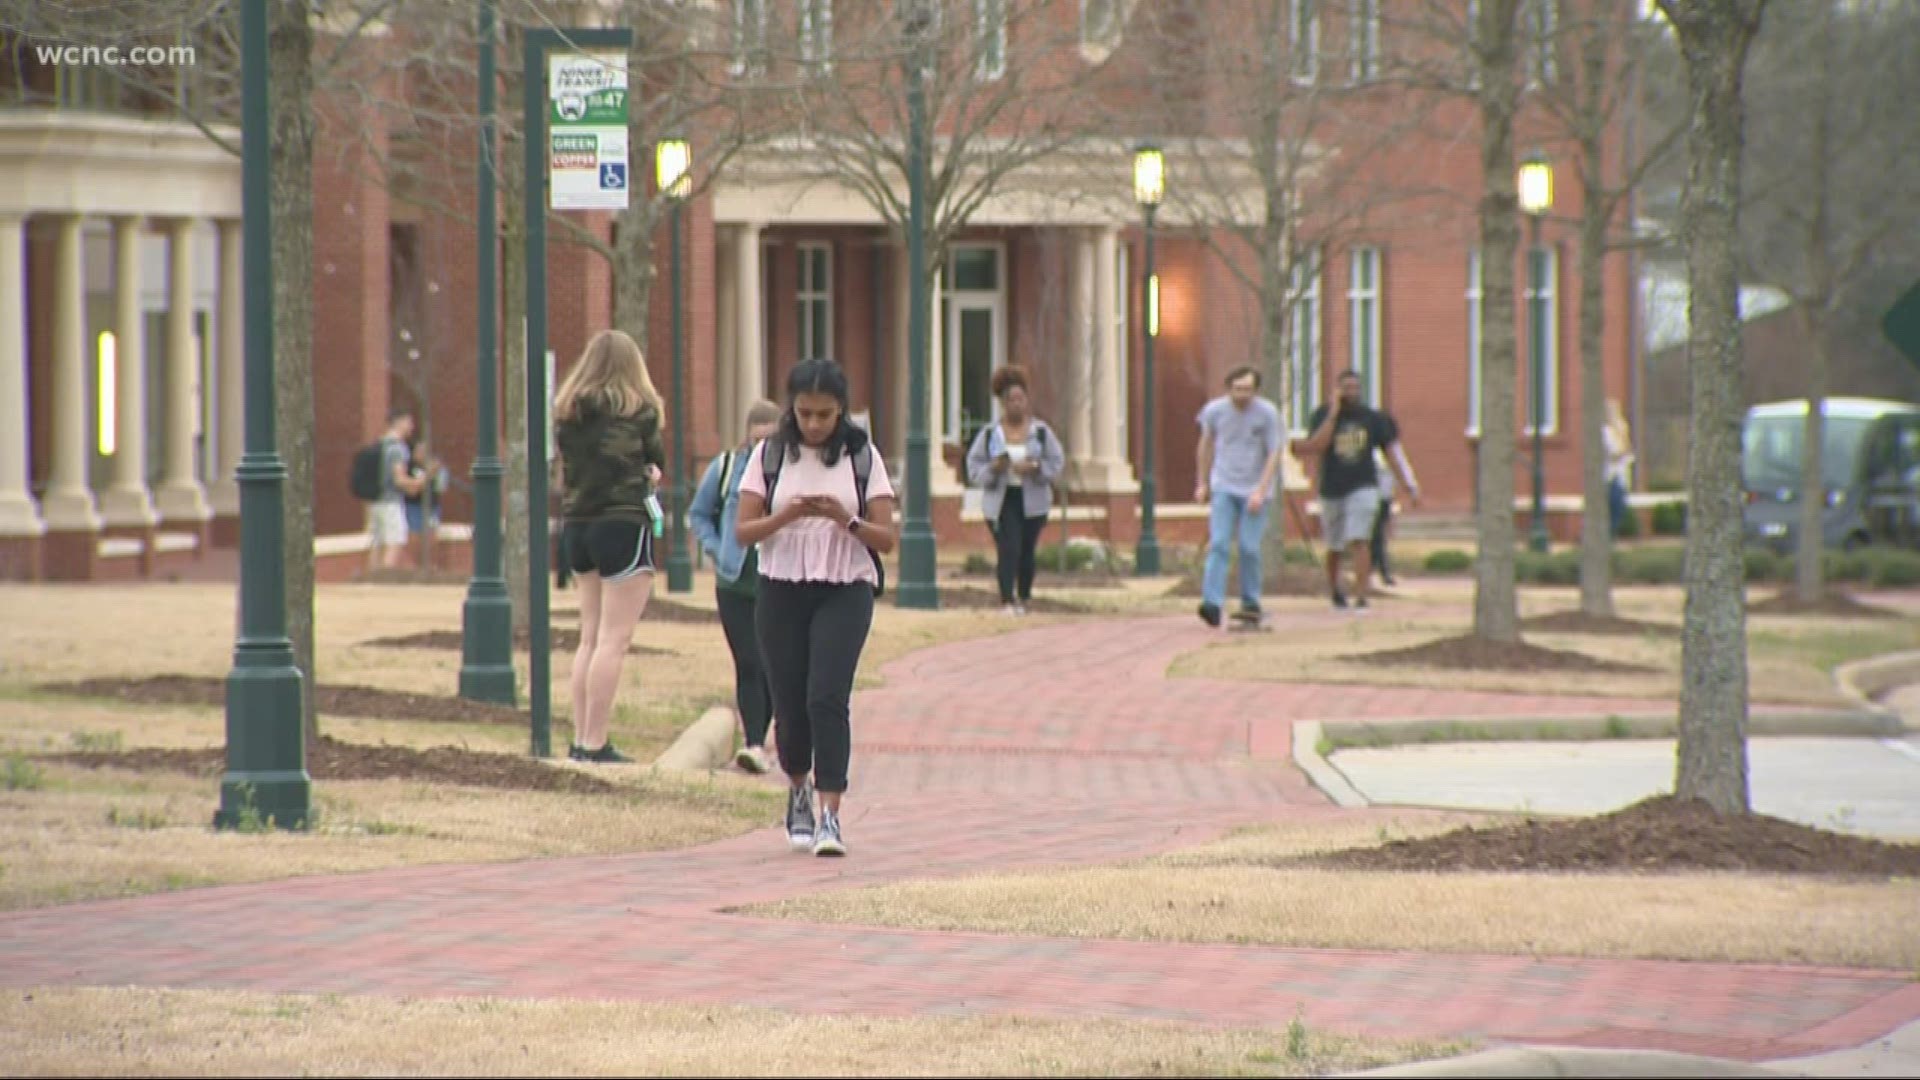 The University of North Carolina at Charlotte announced that they will move to "online instruction wherever possible" effective Monday, March 16.